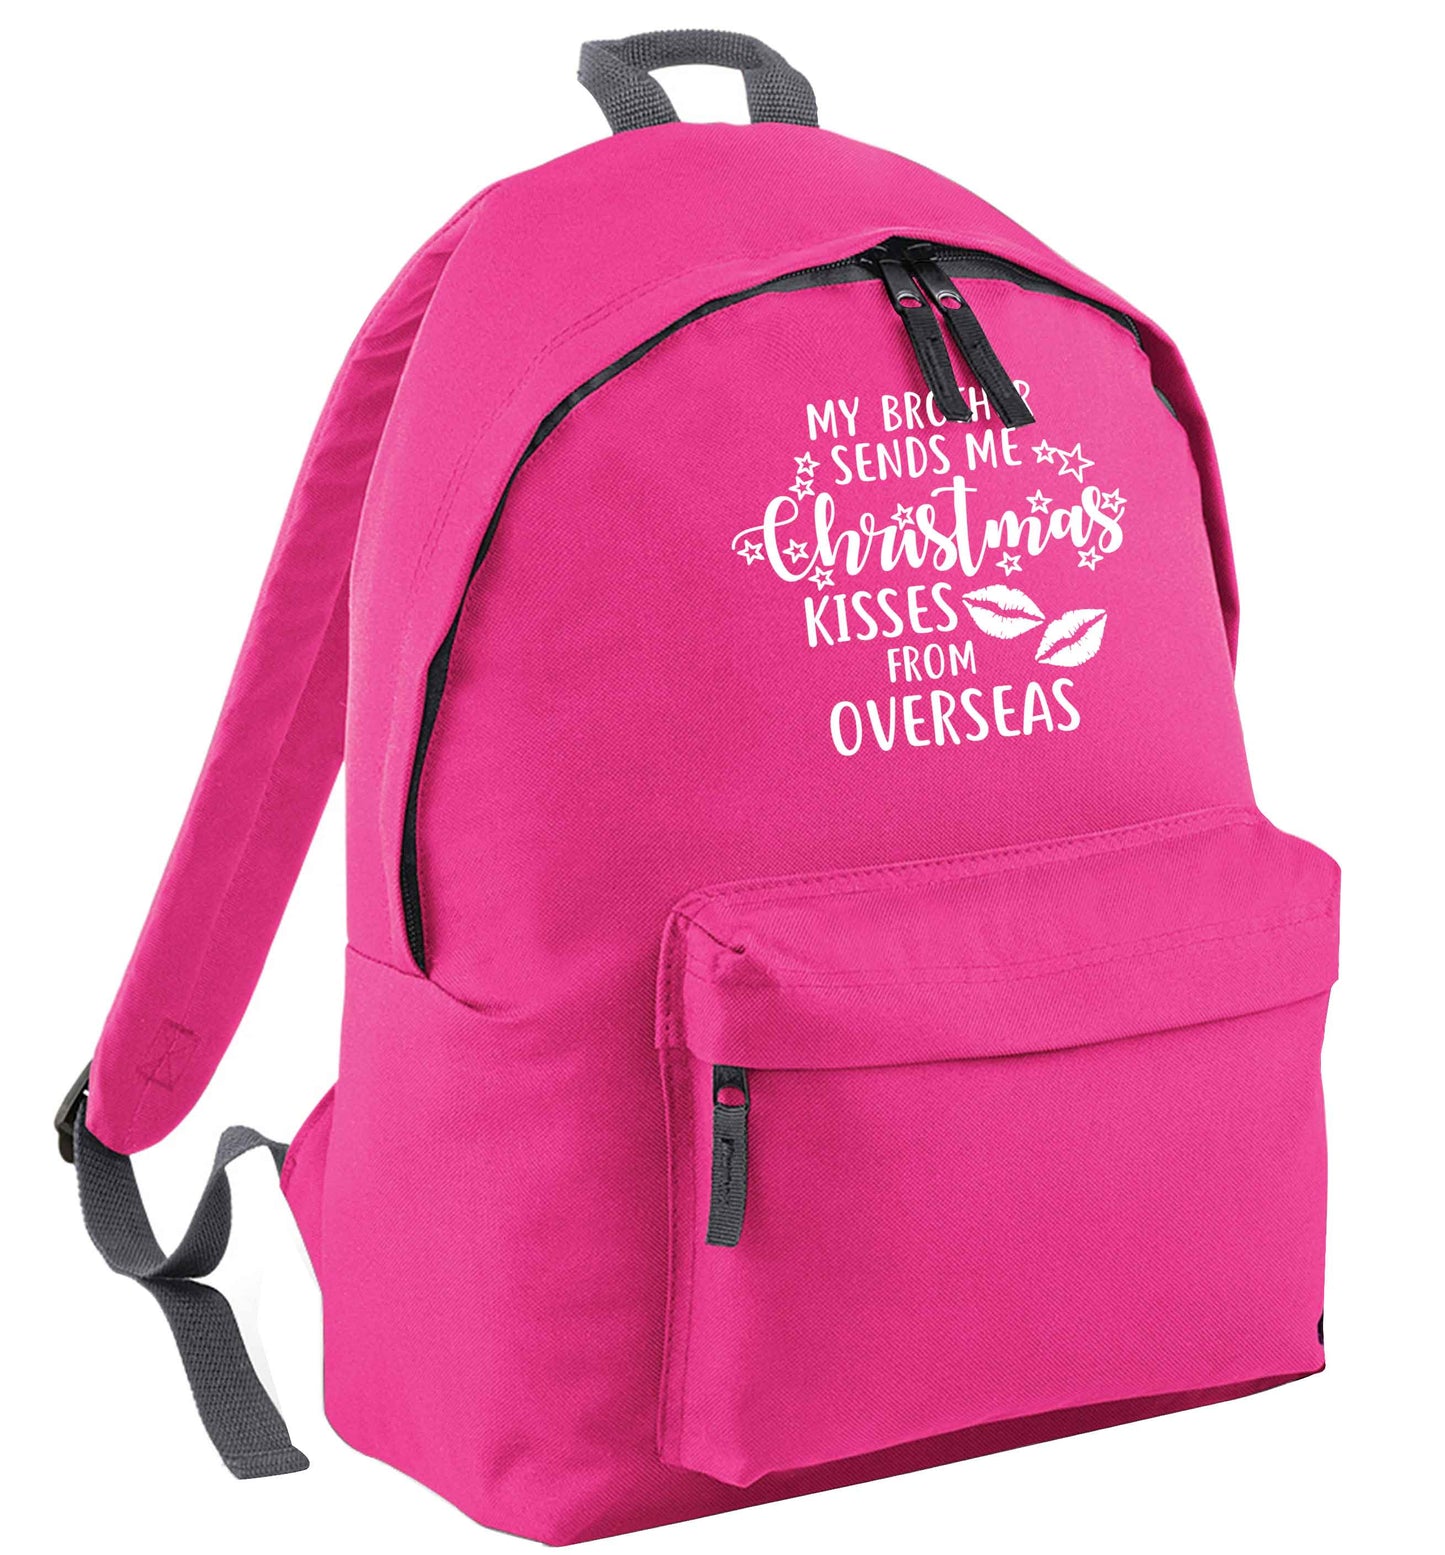 Brother Christmas Kisses Overseas pink adults backpack